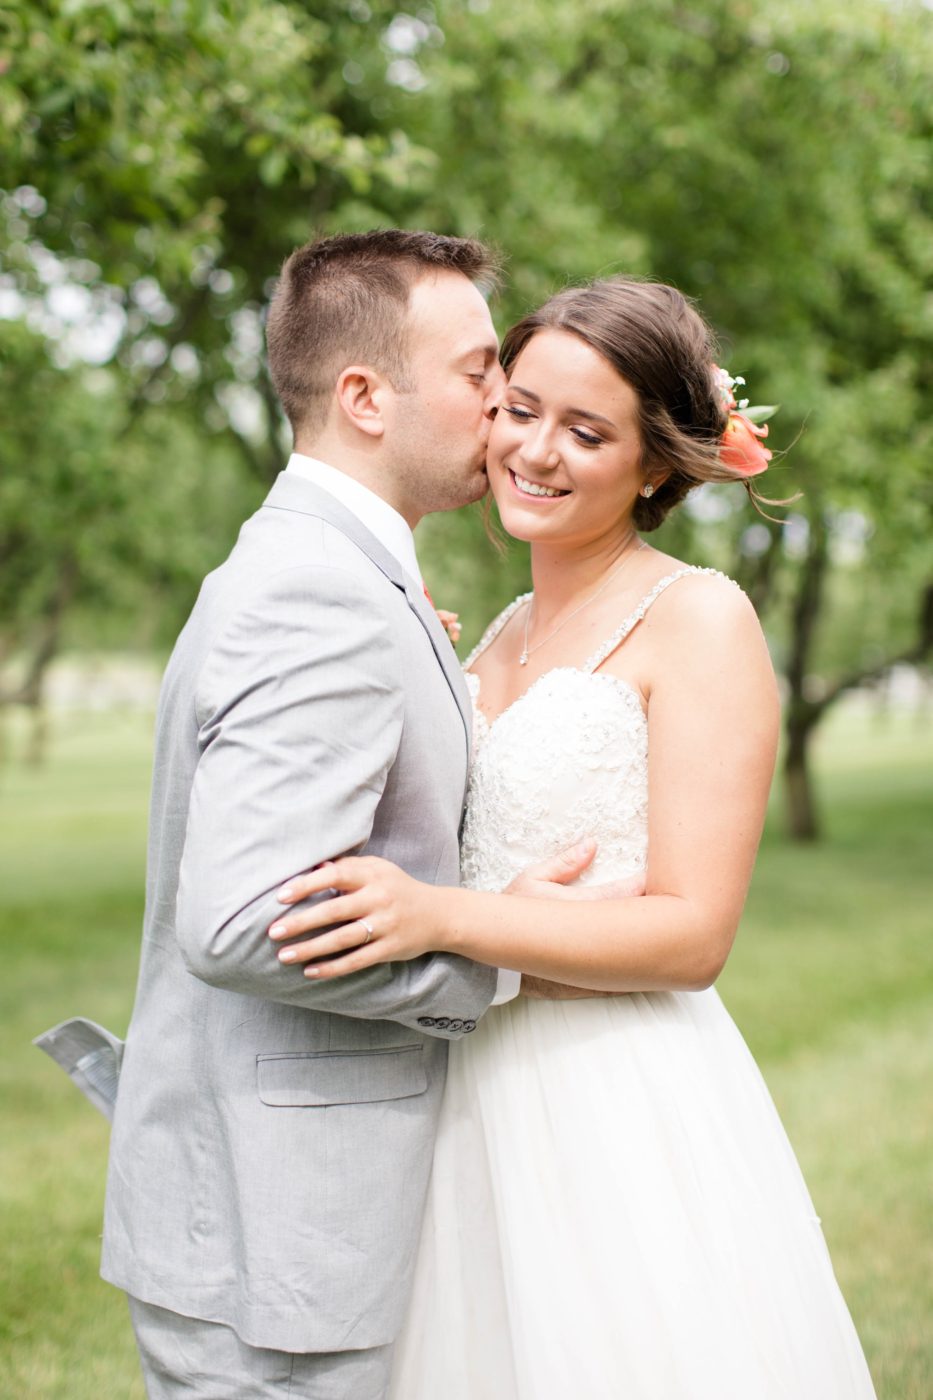 Groom holding his bride close as he gives her a kiss on the cheek